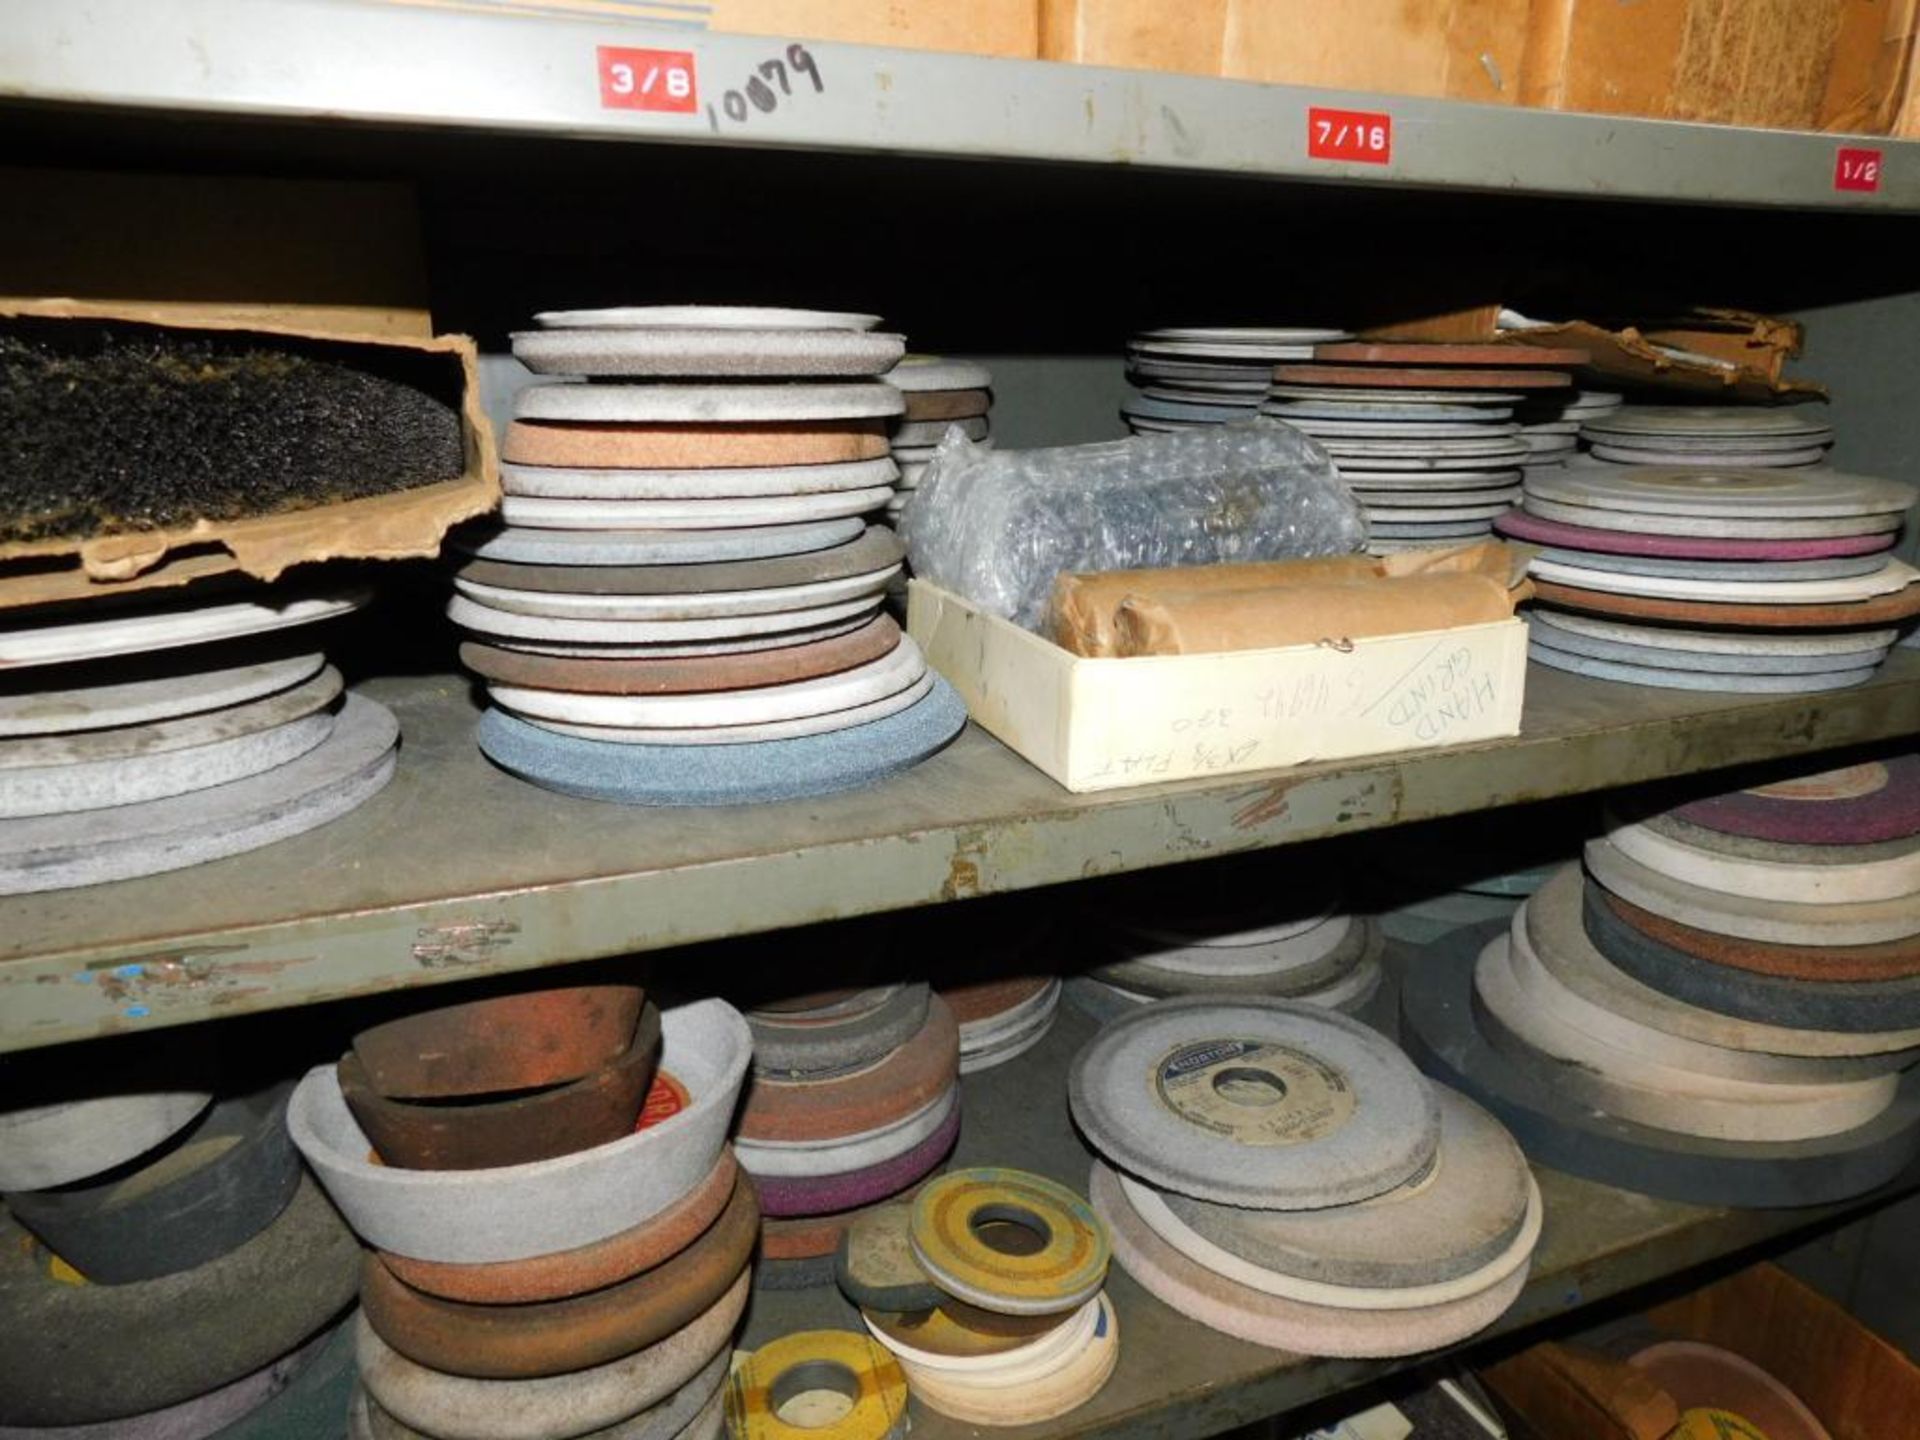 LOT: Contents of Rack: Large Quantity of Assorted Grinding Wheels, Cut Off Wheels, Polishing Stones, - Image 7 of 15